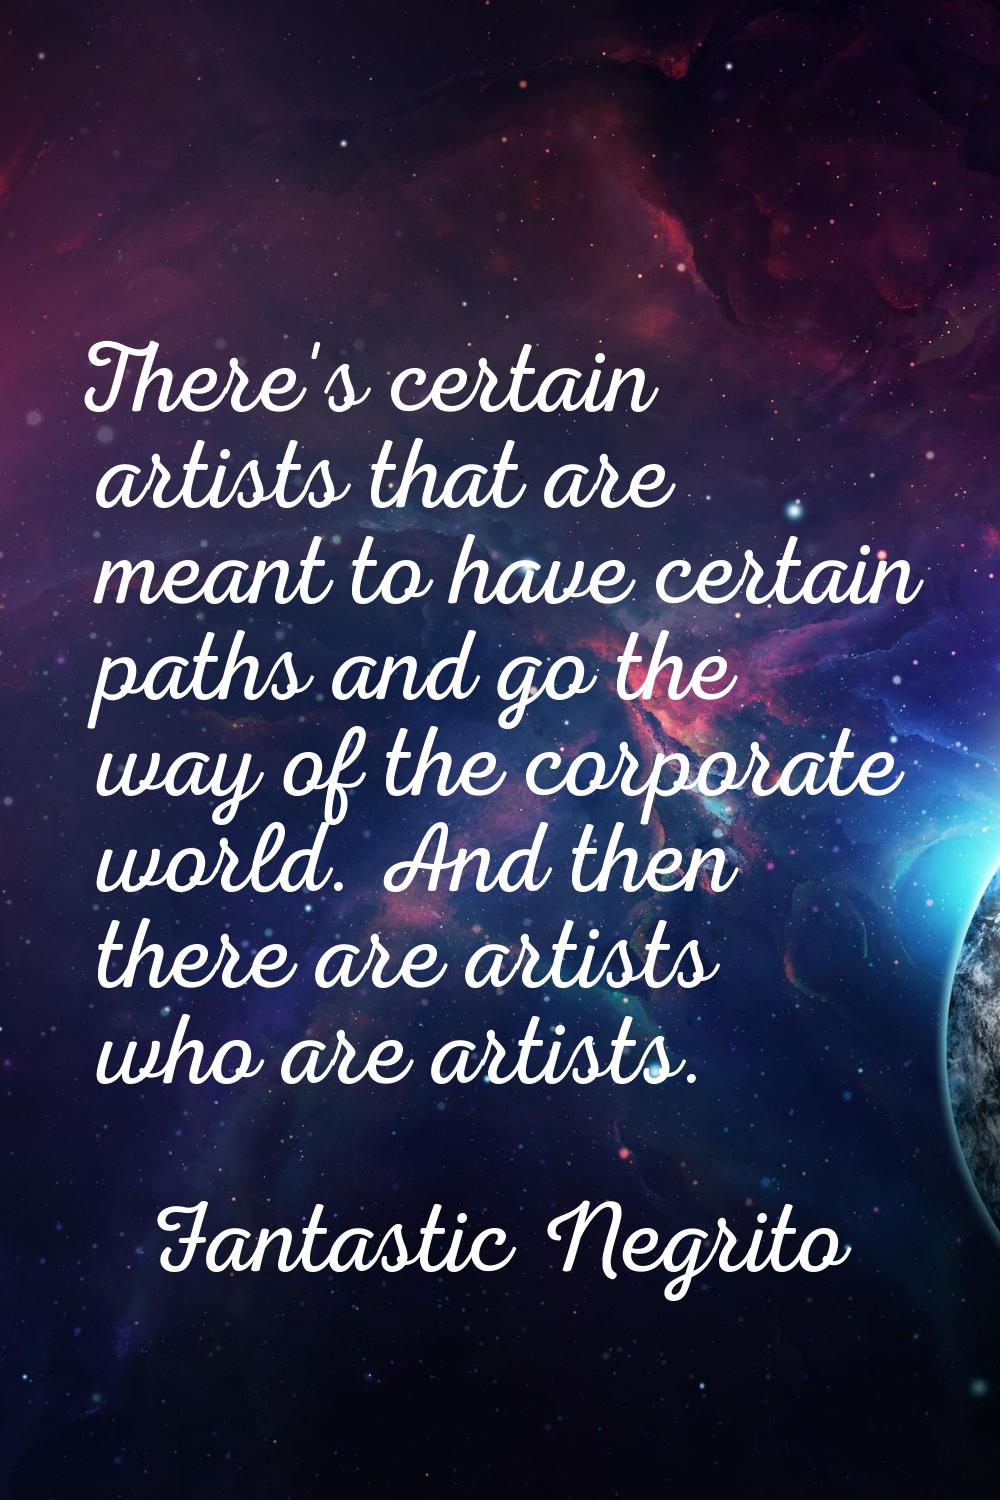 There's certain artists that are meant to have certain paths and go the way of the corporate world.